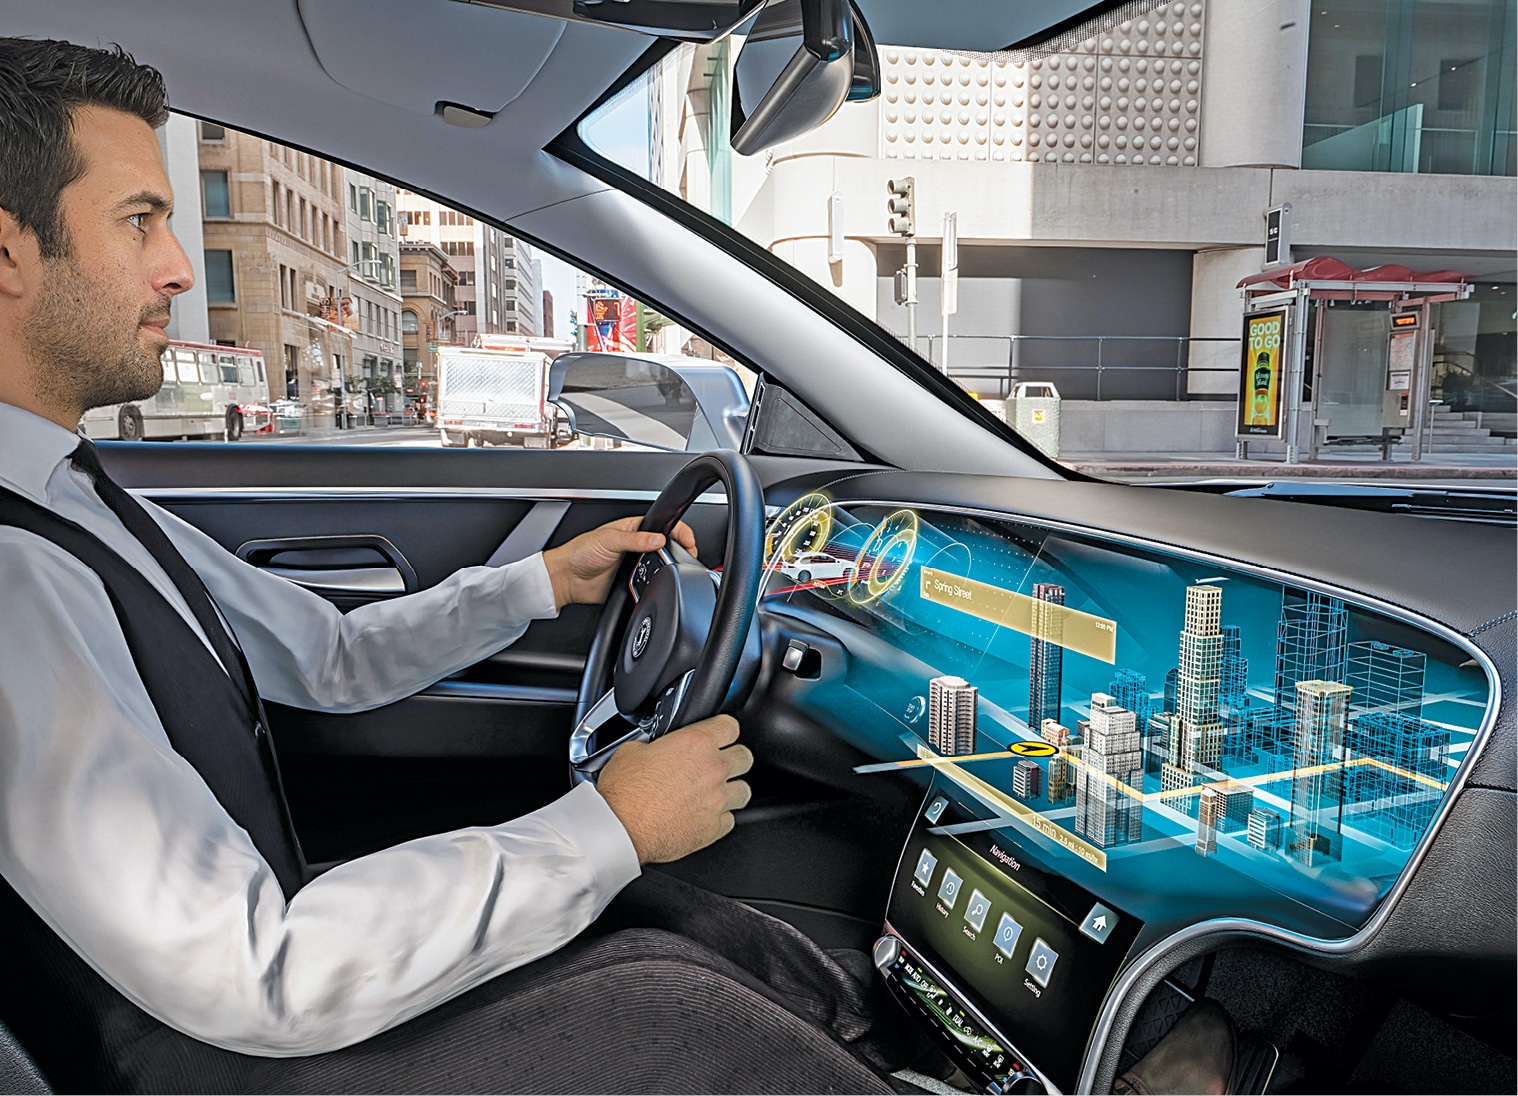 How HMI Technologies Are Enhancing Safety And In-Vehicle Experience